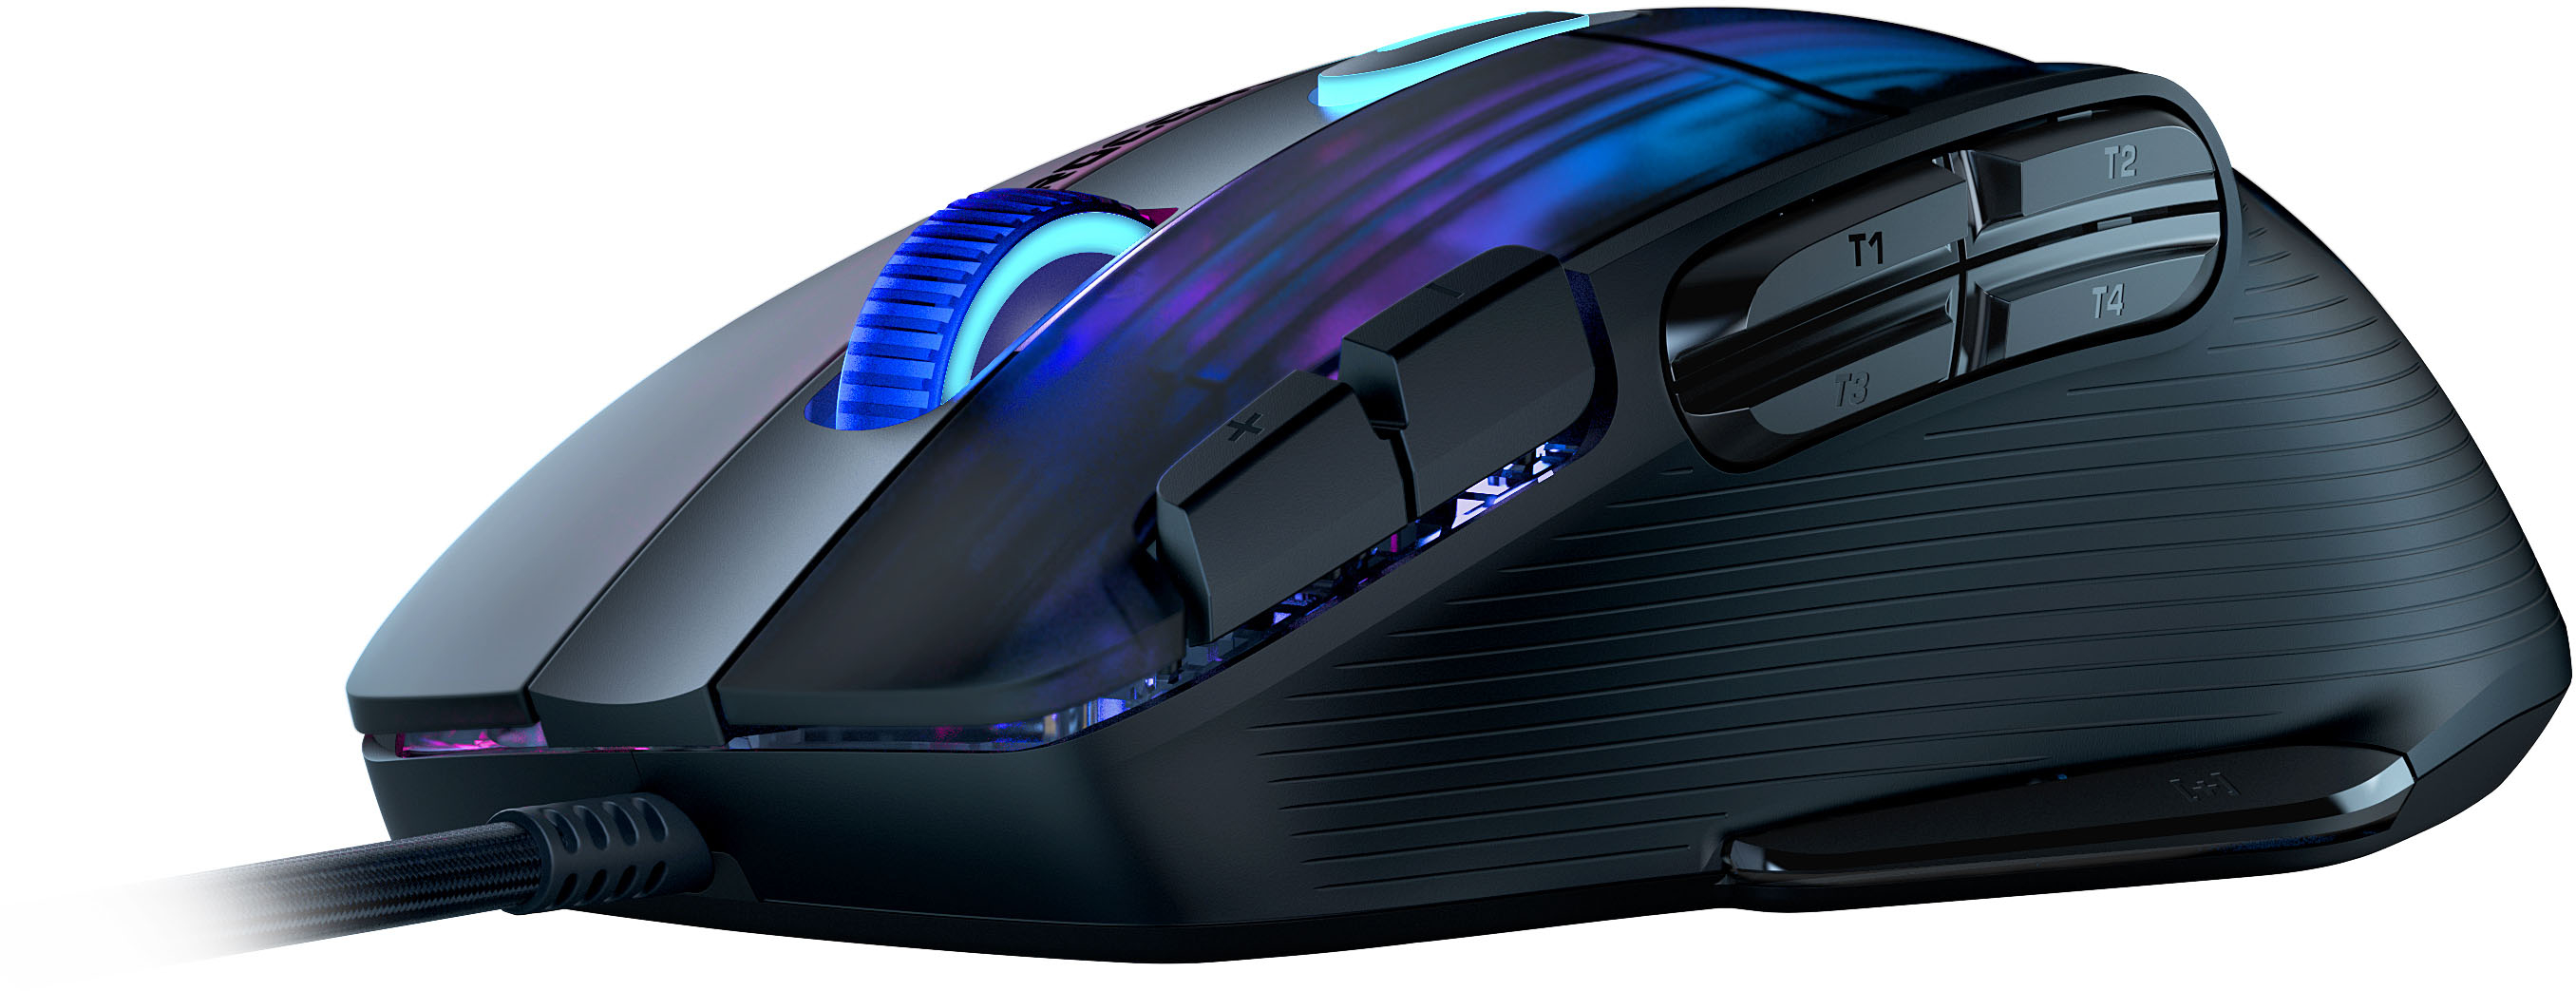 design Mouse Wired Kone Buy AIMO Best lighting Optical - ROCCAT Ambidextrous multi-button Black with XP RGB Gaming ROC-11-420-01 &